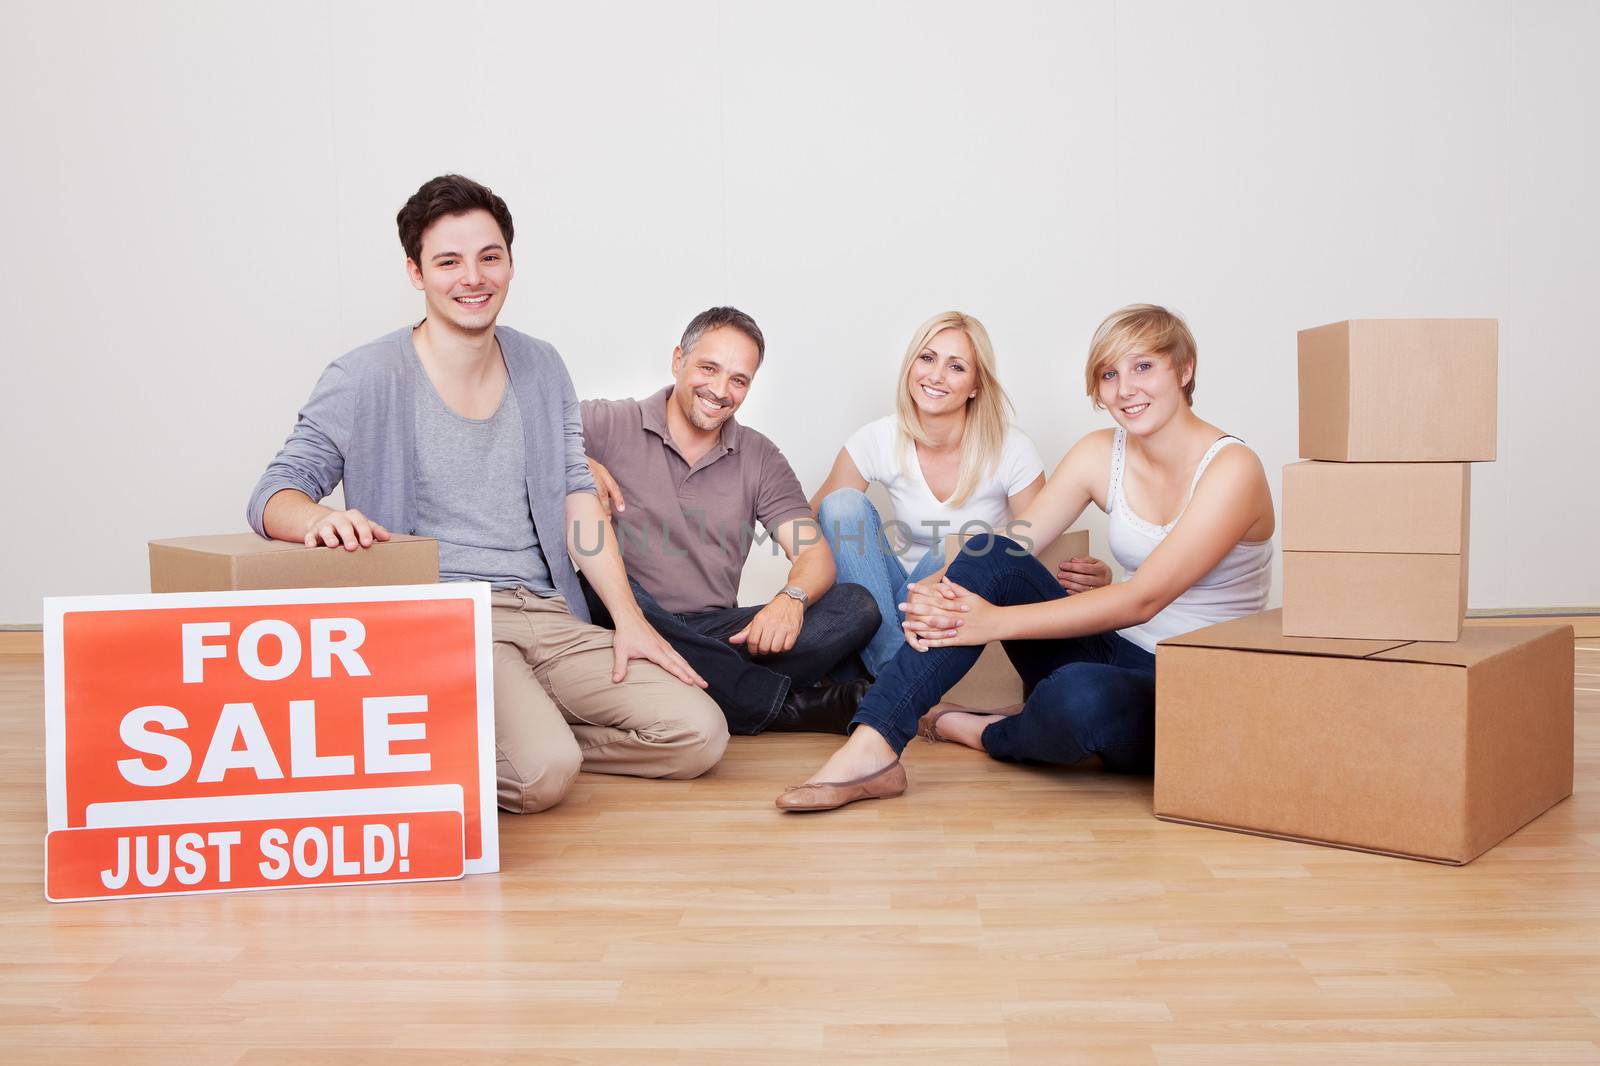 Happy family packing up their home sitting in an empty room on the floor with a sold sign and a small stack of cardboard cartons